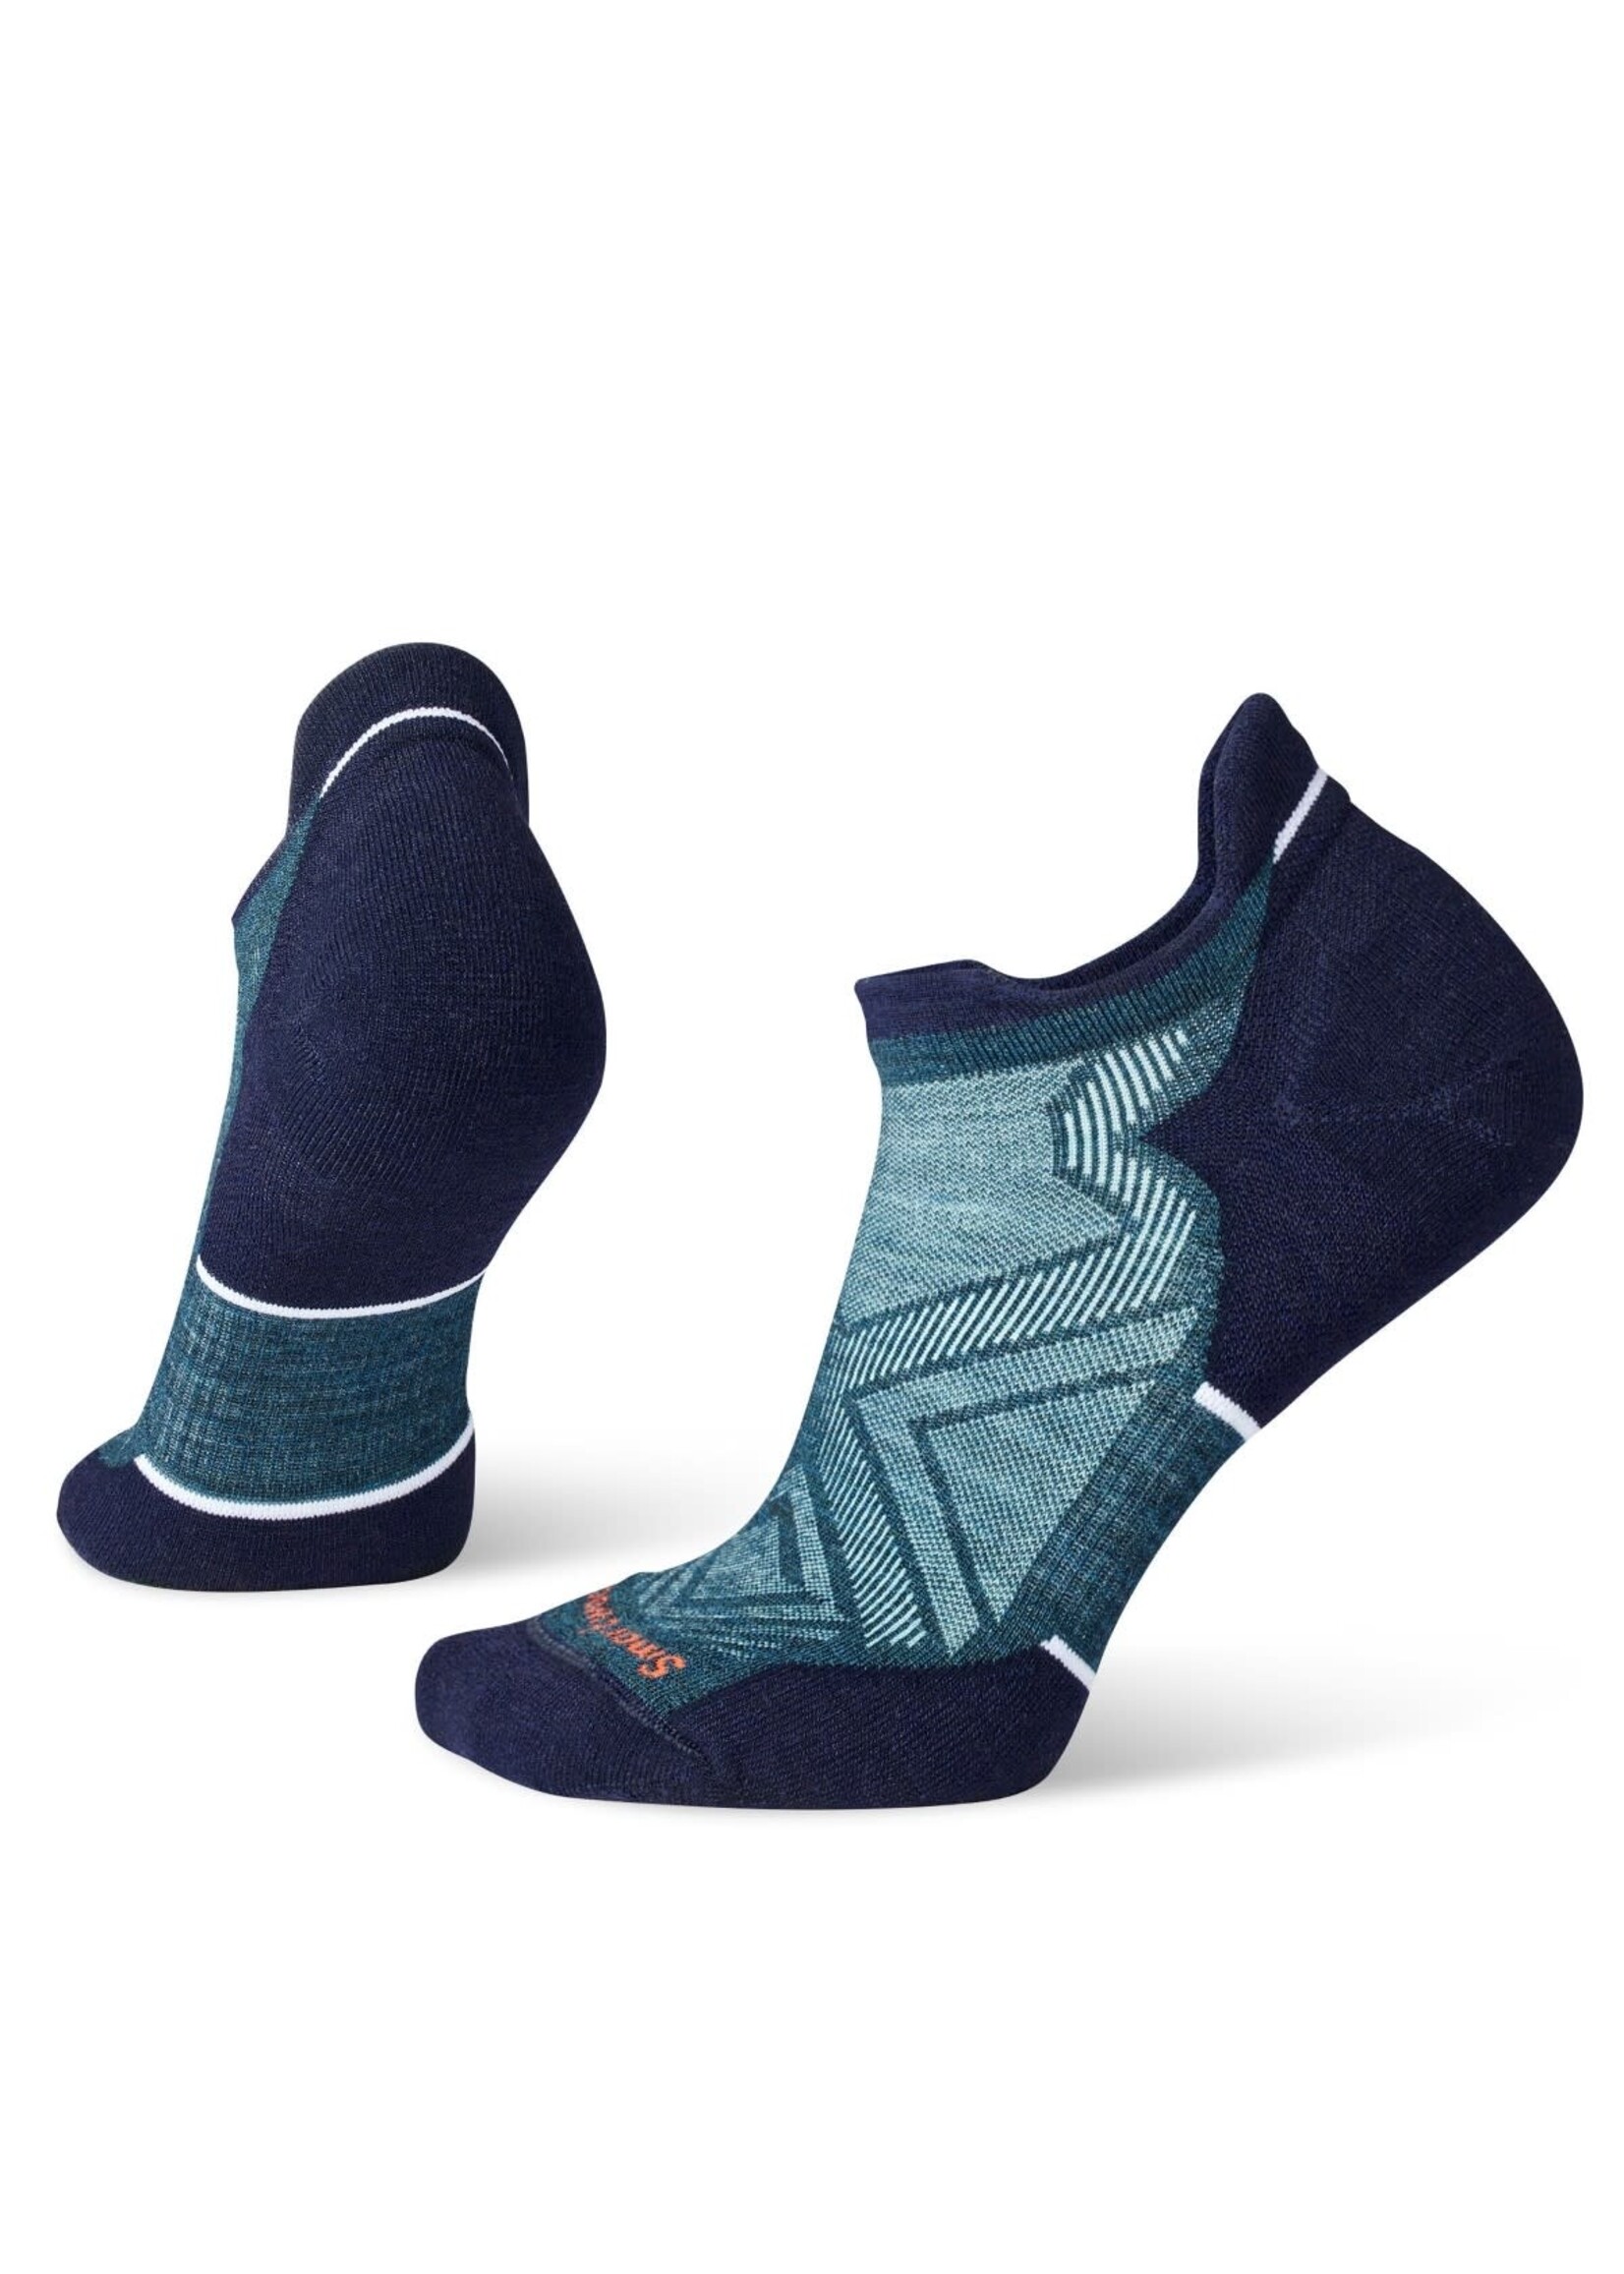 Smartwool Smartwool Run Targeted Cushion Low Ankle - Women